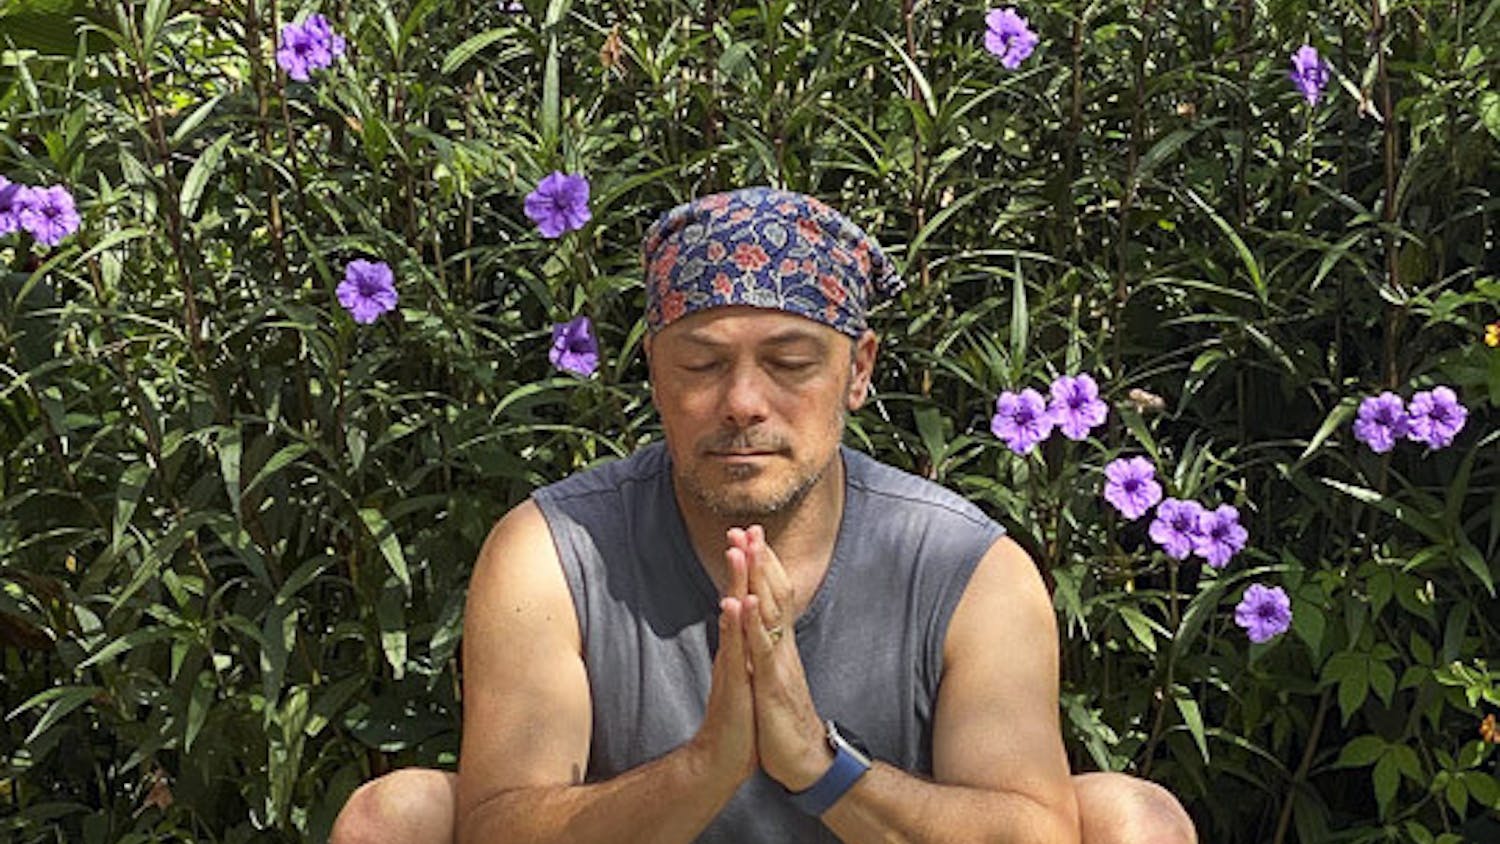 David Moscowitz, a professor at the School of Journalism and Mass Communications sits in the Malasana pose, a.k.a. the Garland pose on Sept. 5, 2020. Moscowitz offers donation funded yoga lessons at Rooted Yoga, on Sunday afternoons.&nbsp;